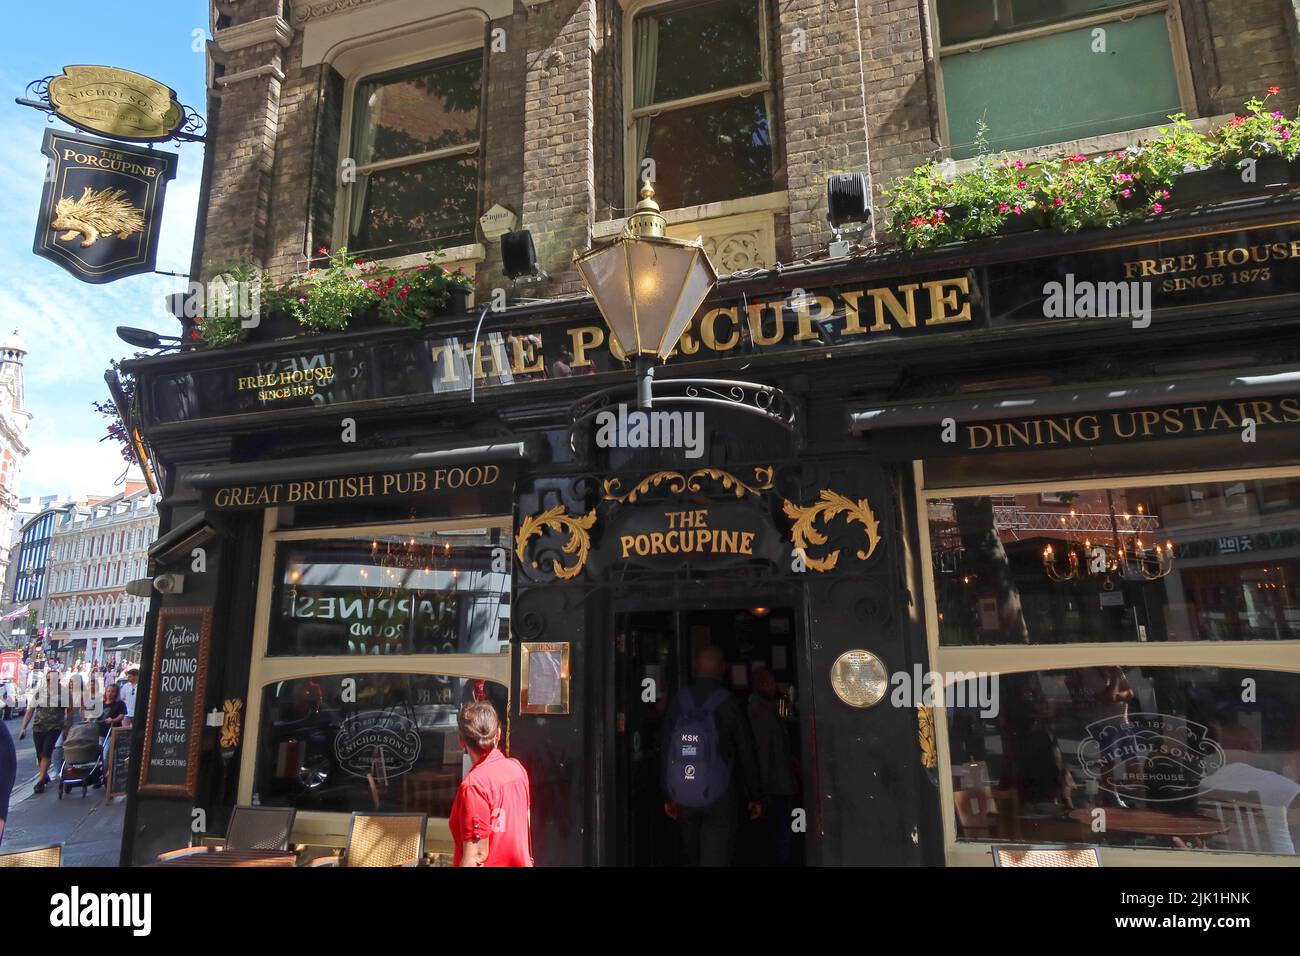 The Porcupine pub, 48 Charing Cross Road, Soho, Londres, Angleterre, Royaume-Uni, WC2H 0BS Banque D'Images